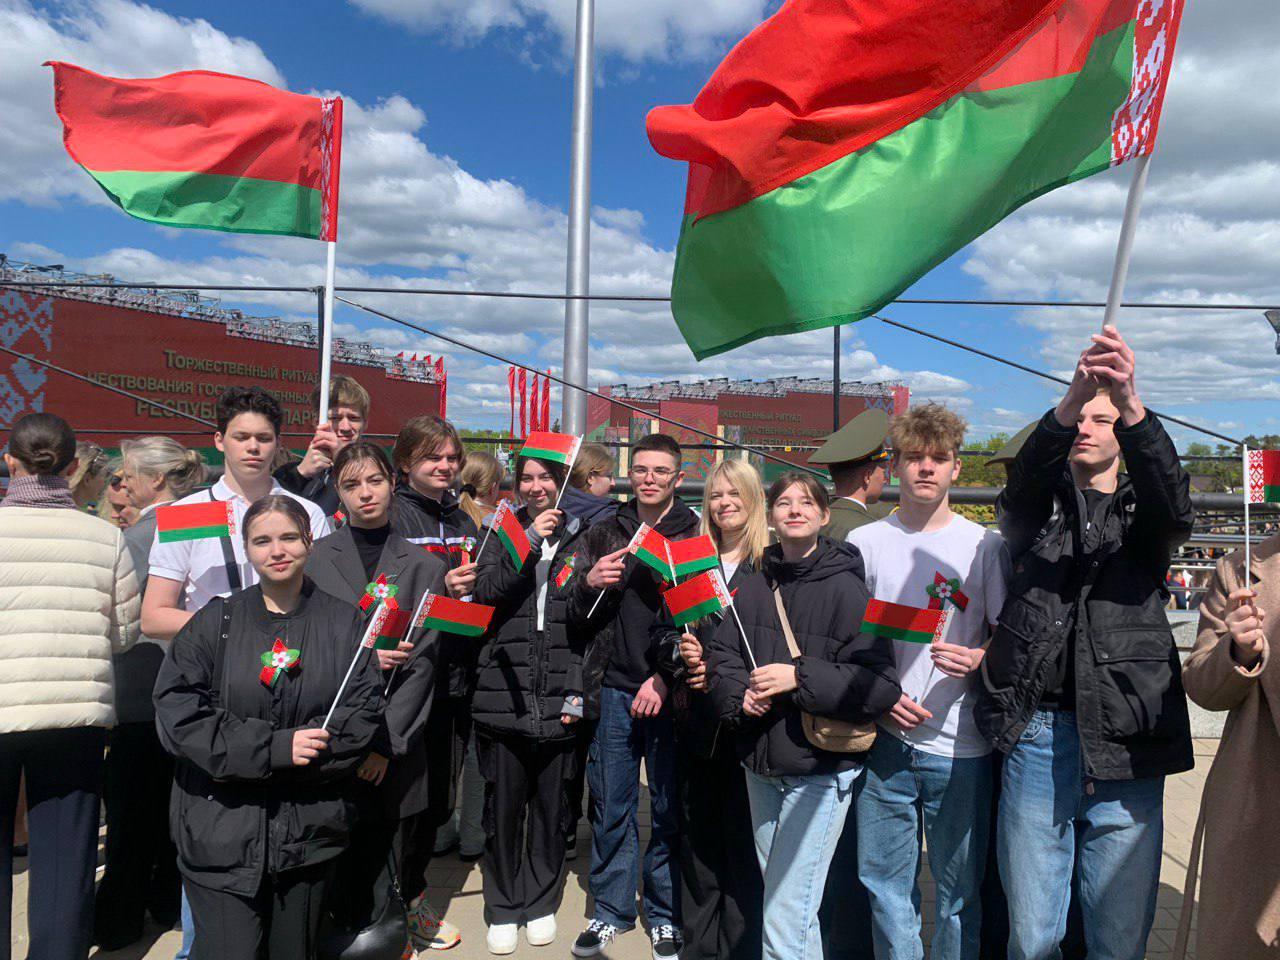 Ceremonial event honoring the state symbols of the Republic of Belarus